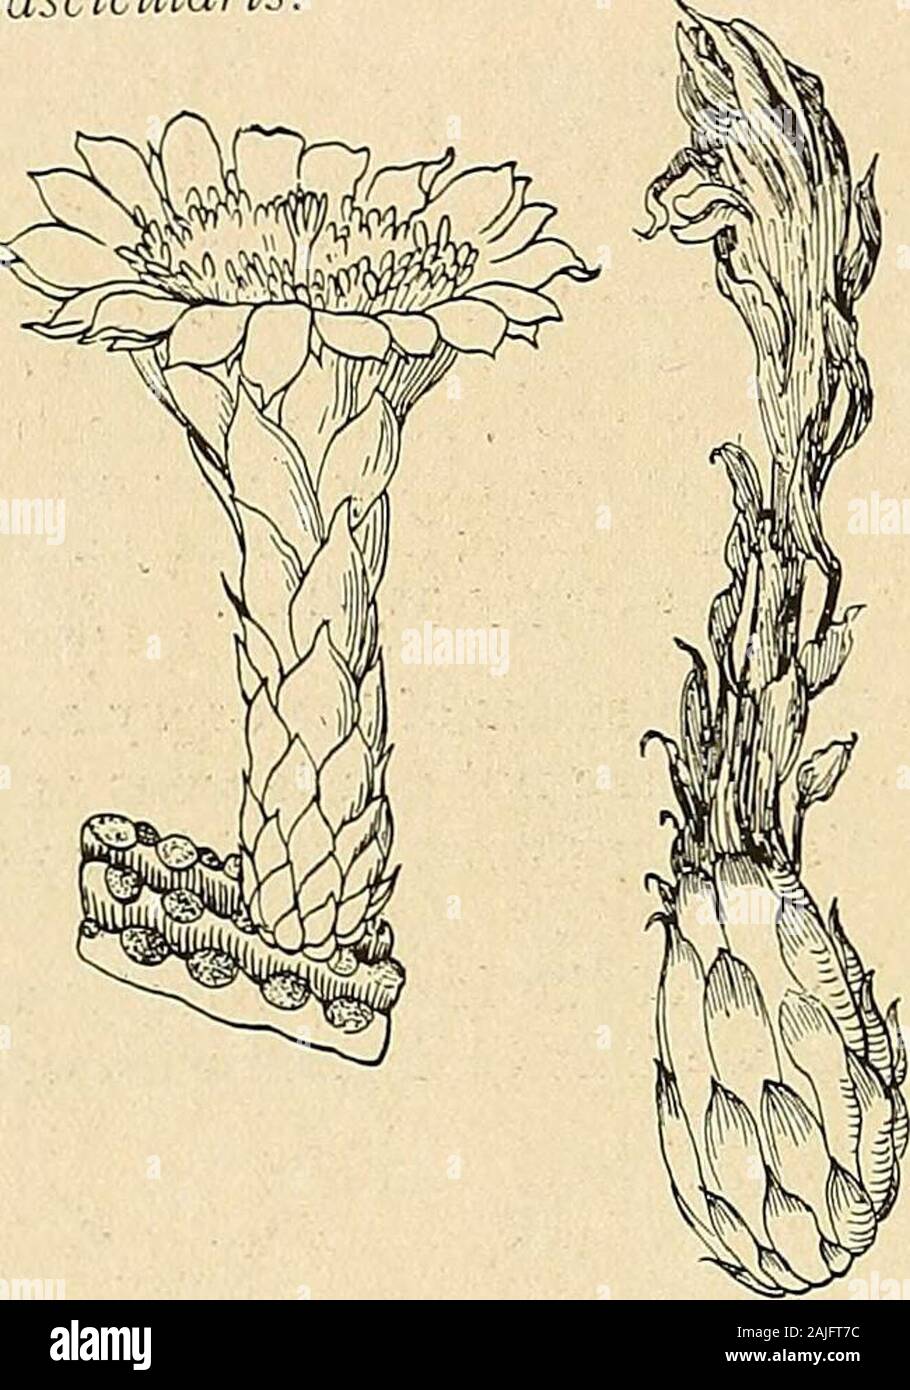 The Cactaceae : descriptions and illustrations of plants of the cactus family . pper 2 cm. long; style slender, 7 cm. long,cream-colored; stigma-lobes about 12, 4 to 5 mm. long, cream-colored; fruit said to be edible; seeds2 mm. broad. Type locality: On mountain slopes along the way from Tacna, Chile, to Arequipa, Peru,up to 9,000 feet (2,740 meters) altitude. Distribution: Southern Peru and northern Chile. The name, Cactus candelaris Meyen (Reise 2: 40. 1835), occurs in Meyens narrative,where he states that it was first found in the Cordilleras of Tacna (now in Chile) in isolatedexamples, con Stock Photo